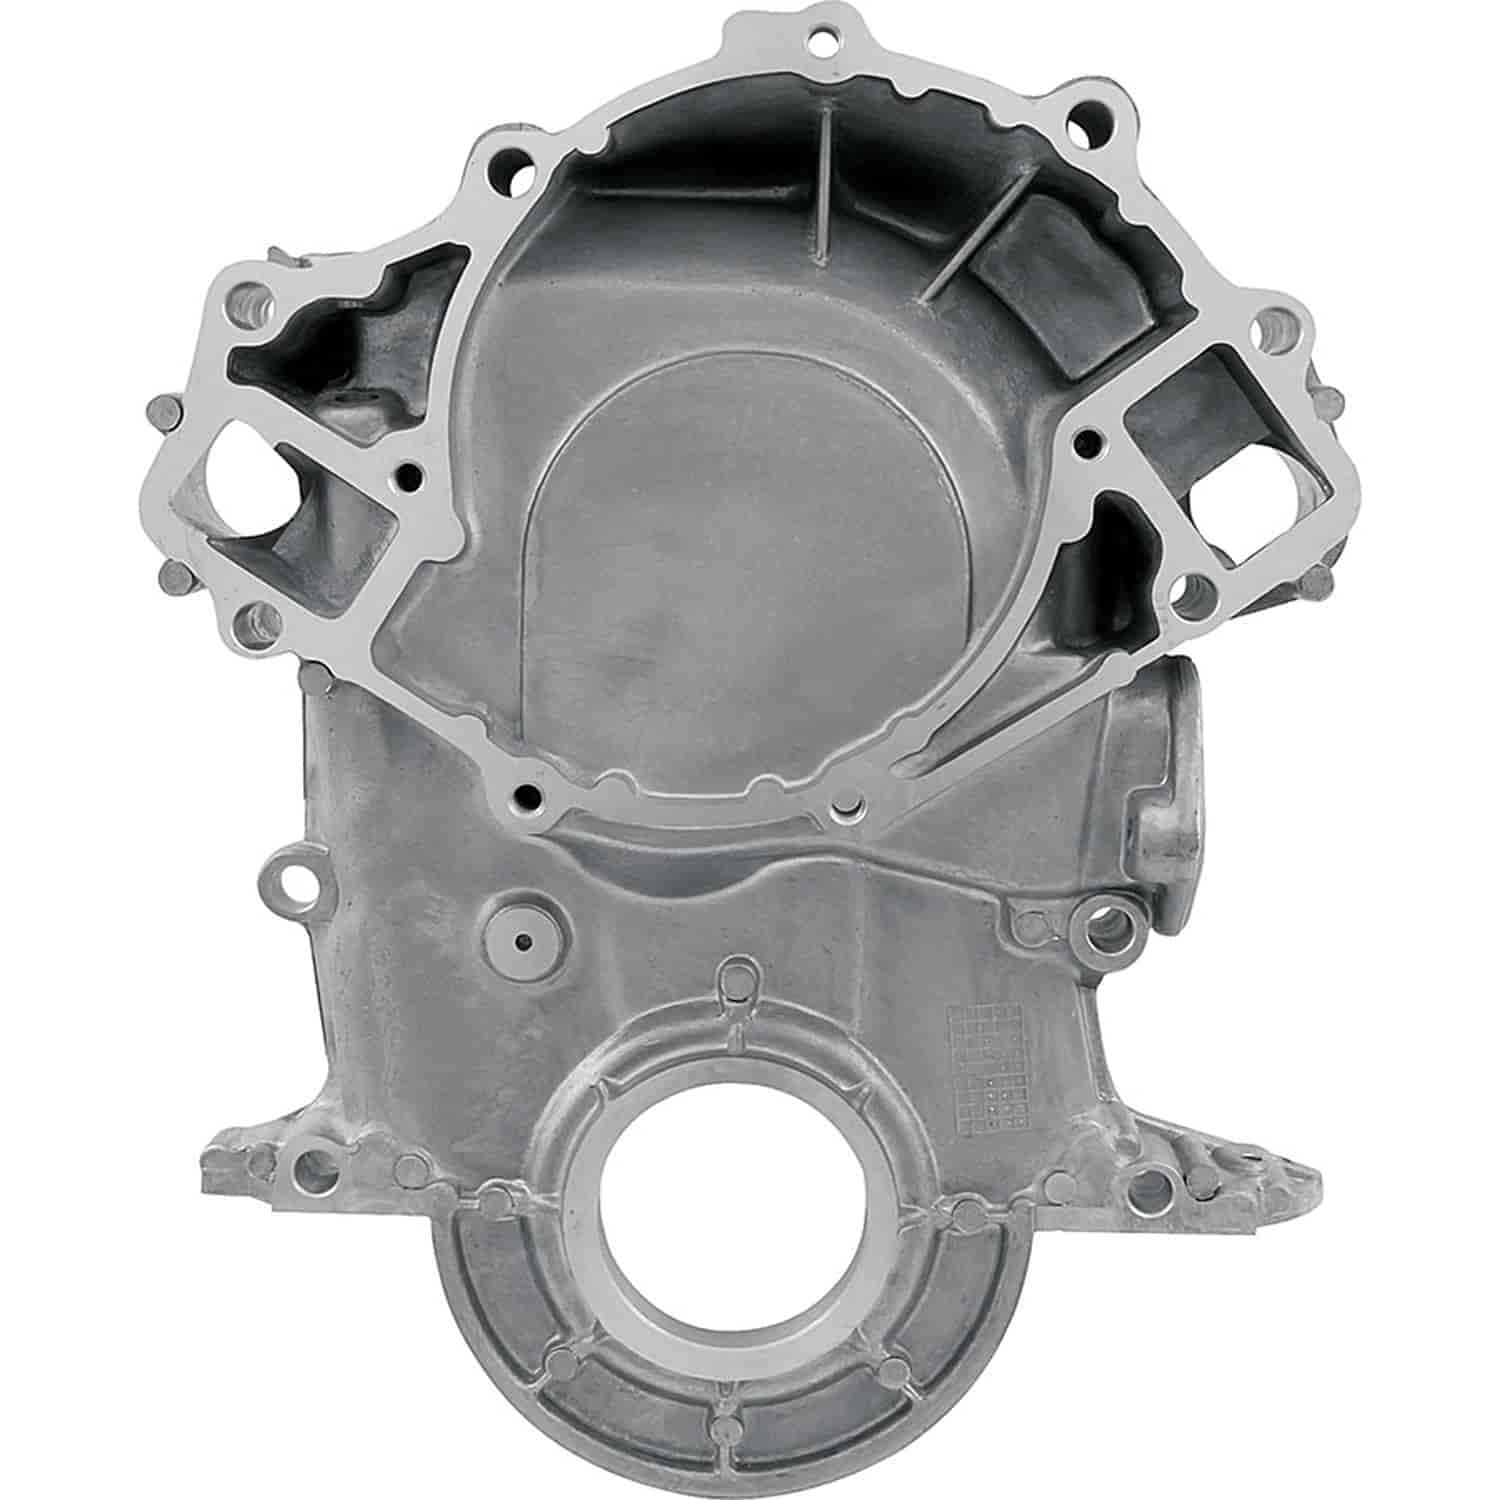 Allstar Performance aluminum timing cover fits most 429-460cid engines. Cover has provisions for a d